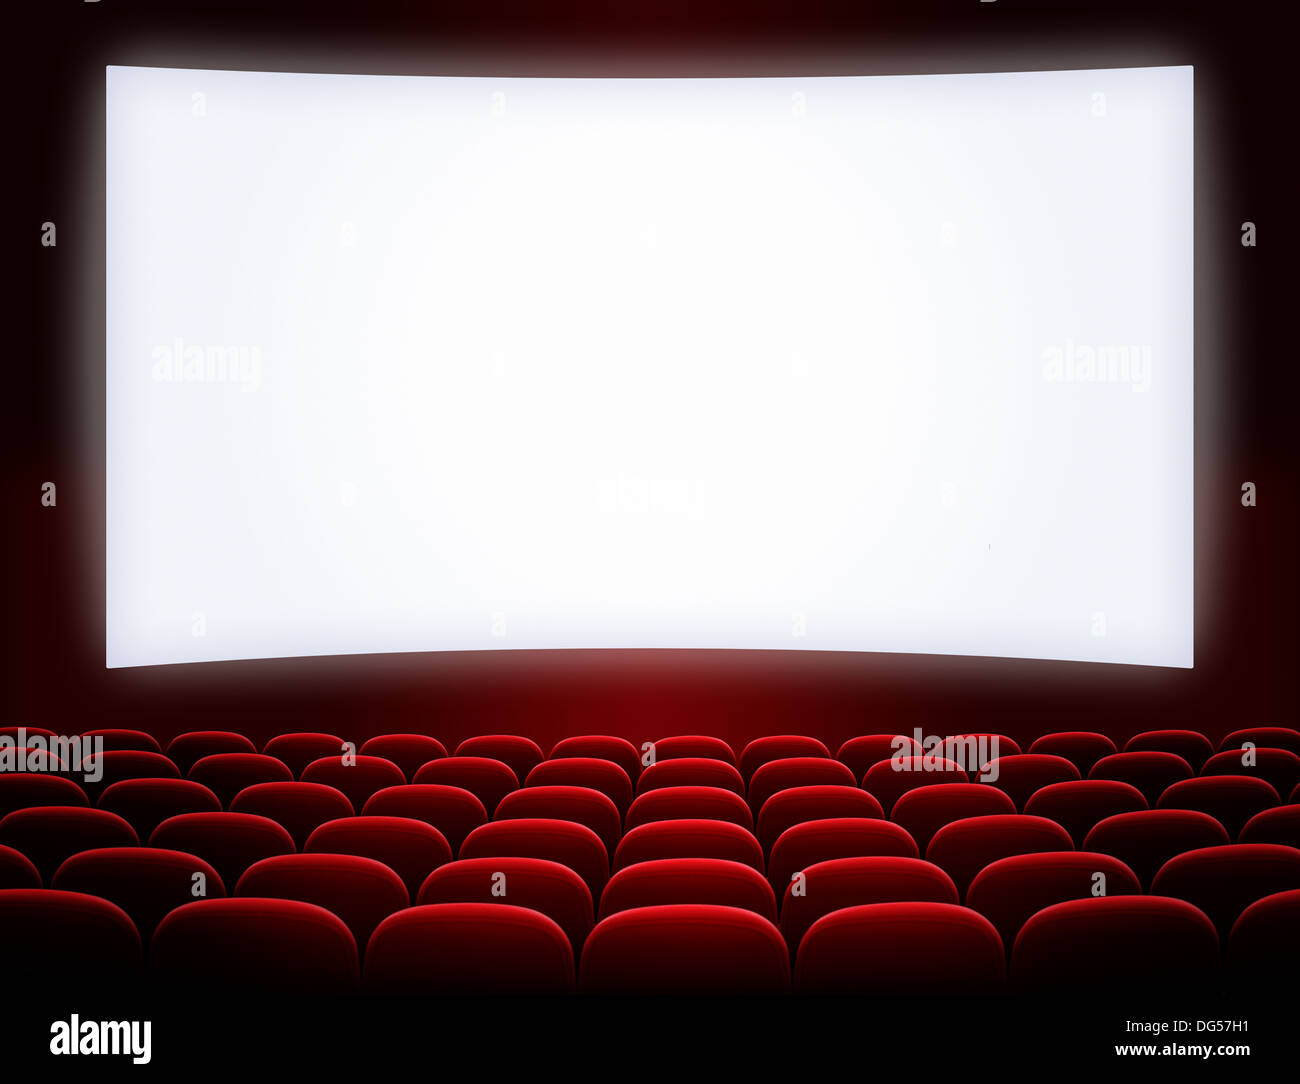 cinema screen with open red seats Stock Photo